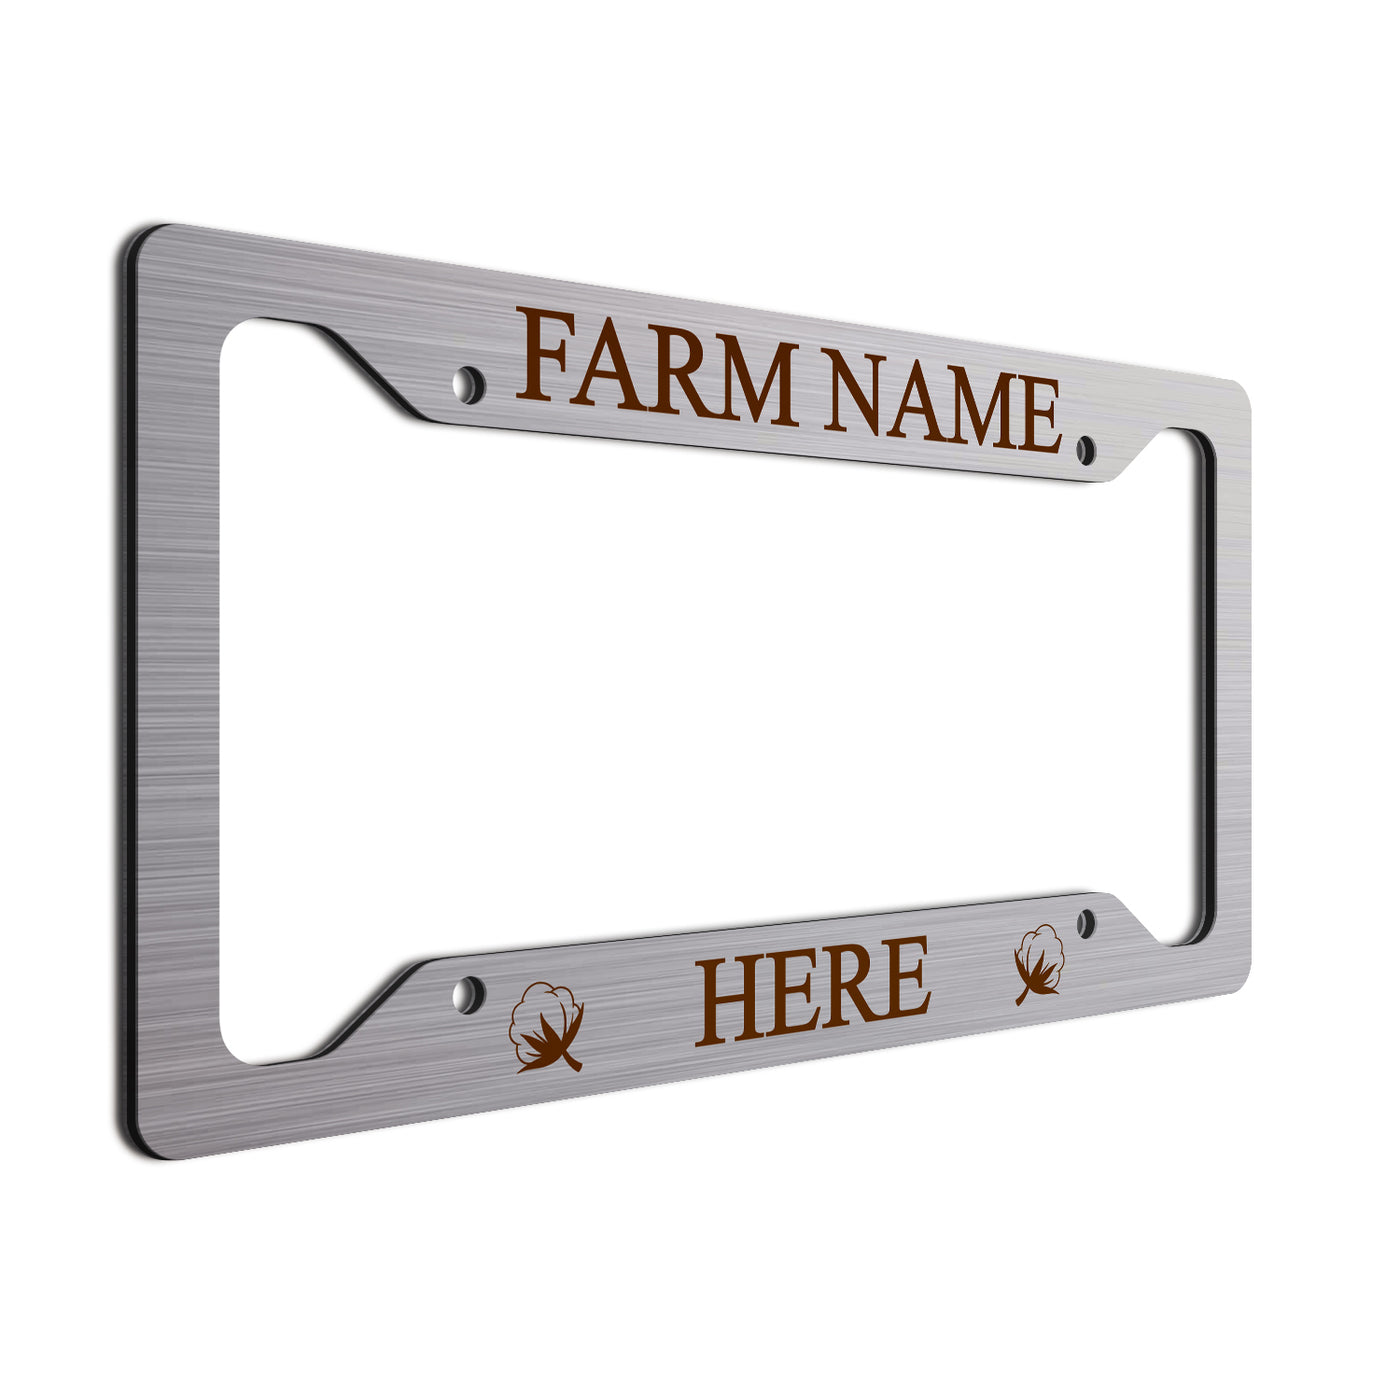 Personalized License Plate Frame For farmers. Choice of colors. Beautiful Brushed Aluminum. Your farm or ranch name will shine!